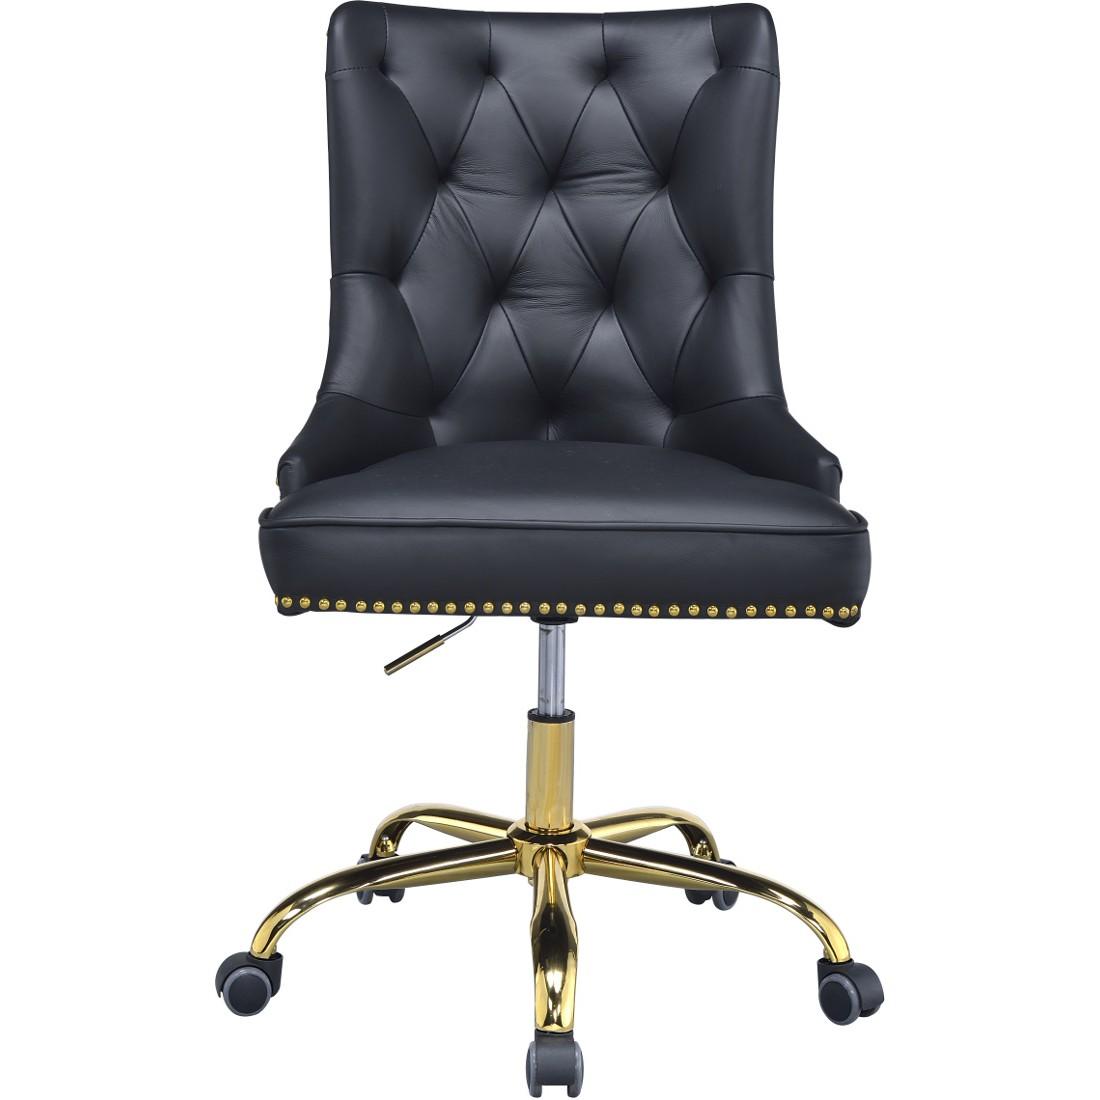 

    
Home Office Chair Black PU & Gold Purlie 92518 Acme Transitional Contemporary
